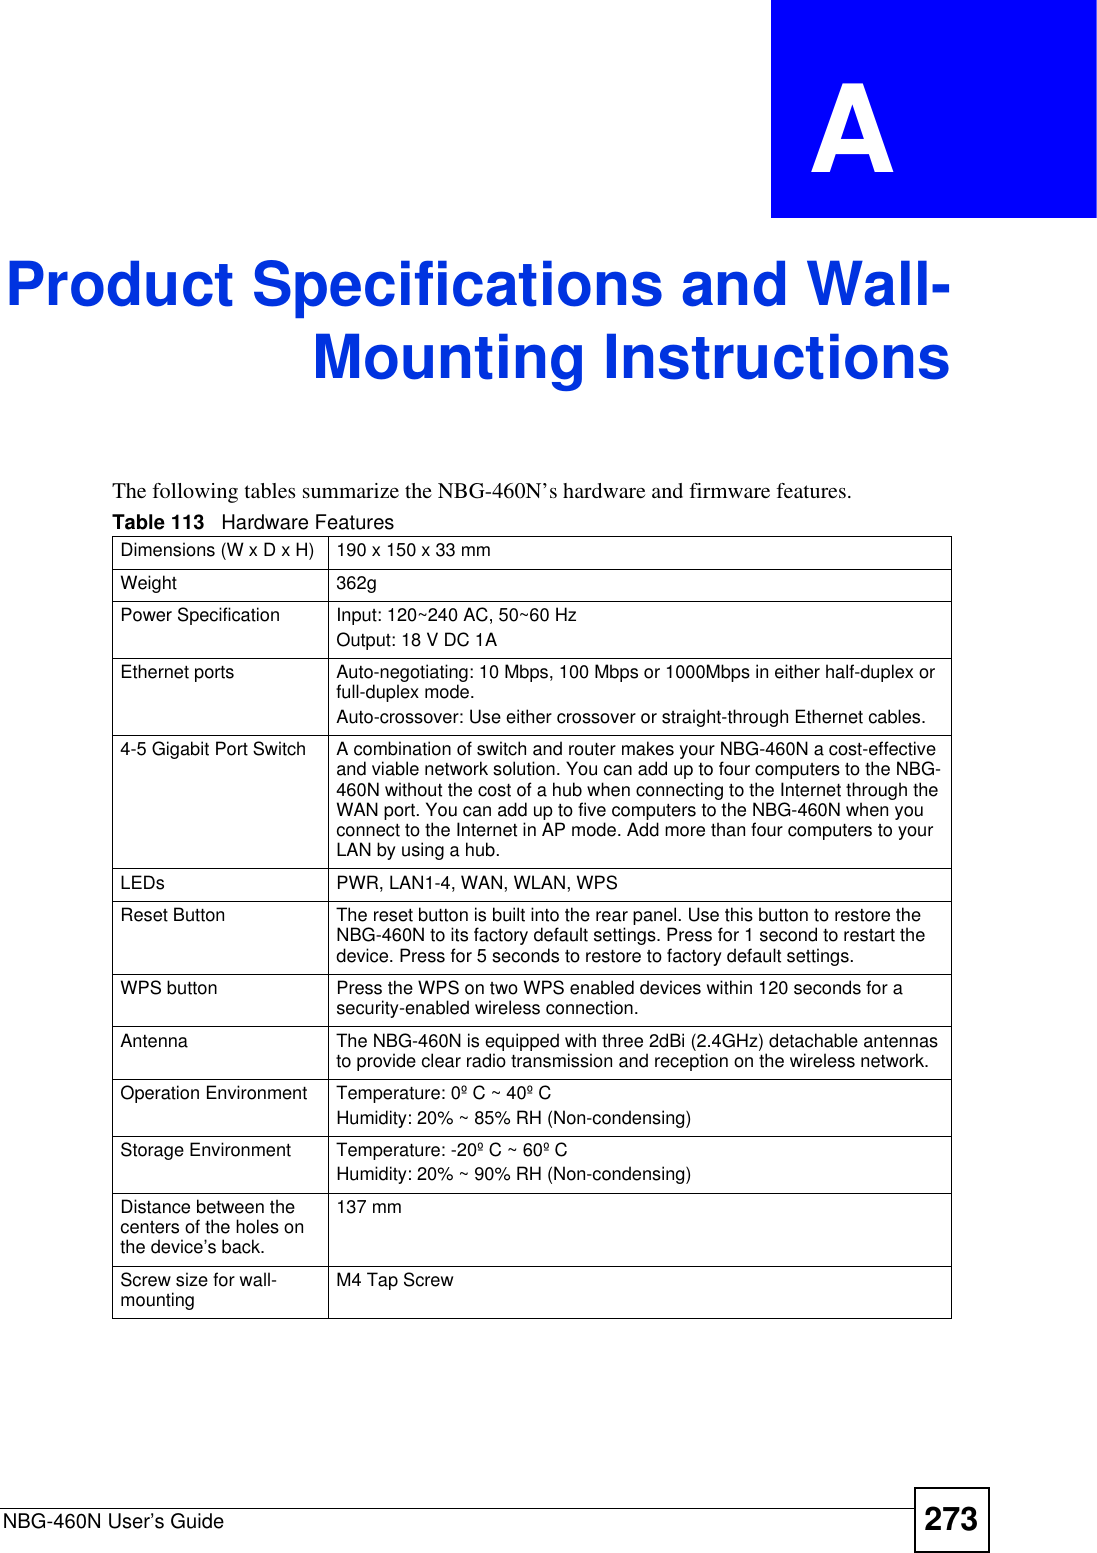 NBG-460N User’s Guide 273APPENDIX  A Product Specifications and Wall-Mounting InstructionsThe following tables summarize the NBG-460N’s hardware and firmware features.Table 113   Hardware FeaturesDimensions (W x D x H)  190 x 150 x 33 mmWeight 362gPower Specification Input: 120~240 AC, 50~60 HzOutput: 18 V DC 1AEthernet ports Auto-negotiating: 10 Mbps, 100 Mbps or 1000Mbps in either half-duplex or full-duplex mode.Auto-crossover: Use either crossover or straight-through Ethernet cables.4-5 Gigabit Port Switch A combination of switch and router makes your NBG-460N a cost-effective and viable network solution. You can add up to four computers to the NBG-460N without the cost of a hub when connecting to the Internet through the WAN port. You can add up to five computers to the NBG-460N when you connect to the Internet in AP mode. Add more than four computers to your LAN by using a hub.LEDs PWR, LAN1-4, WAN, WLAN, WPSReset Button The reset button is built into the rear panel. Use this button to restore the NBG-460N to its factory default settings. Press for 1 second to restart the device. Press for 5 seconds to restore to factory default settings.WPS button Press the WPS on two WPS enabled devices within 120 seconds for a security-enabled wireless connection.Antenna The NBG-460N is equipped with three 2dBi (2.4GHz) detachable antennas to provide clear radio transmission and reception on the wireless network. Operation Environment Temperature: 0º C ~ 40º CHumidity: 20% ~ 85% RH (Non-condensing)Storage Environment Temperature: -20º C ~ 60º CHumidity: 20% ~ 90% RH (Non-condensing)Distance between the centers of the holes on the device’s back.137 mmScrew size for wall-mounting M4 Tap Screw